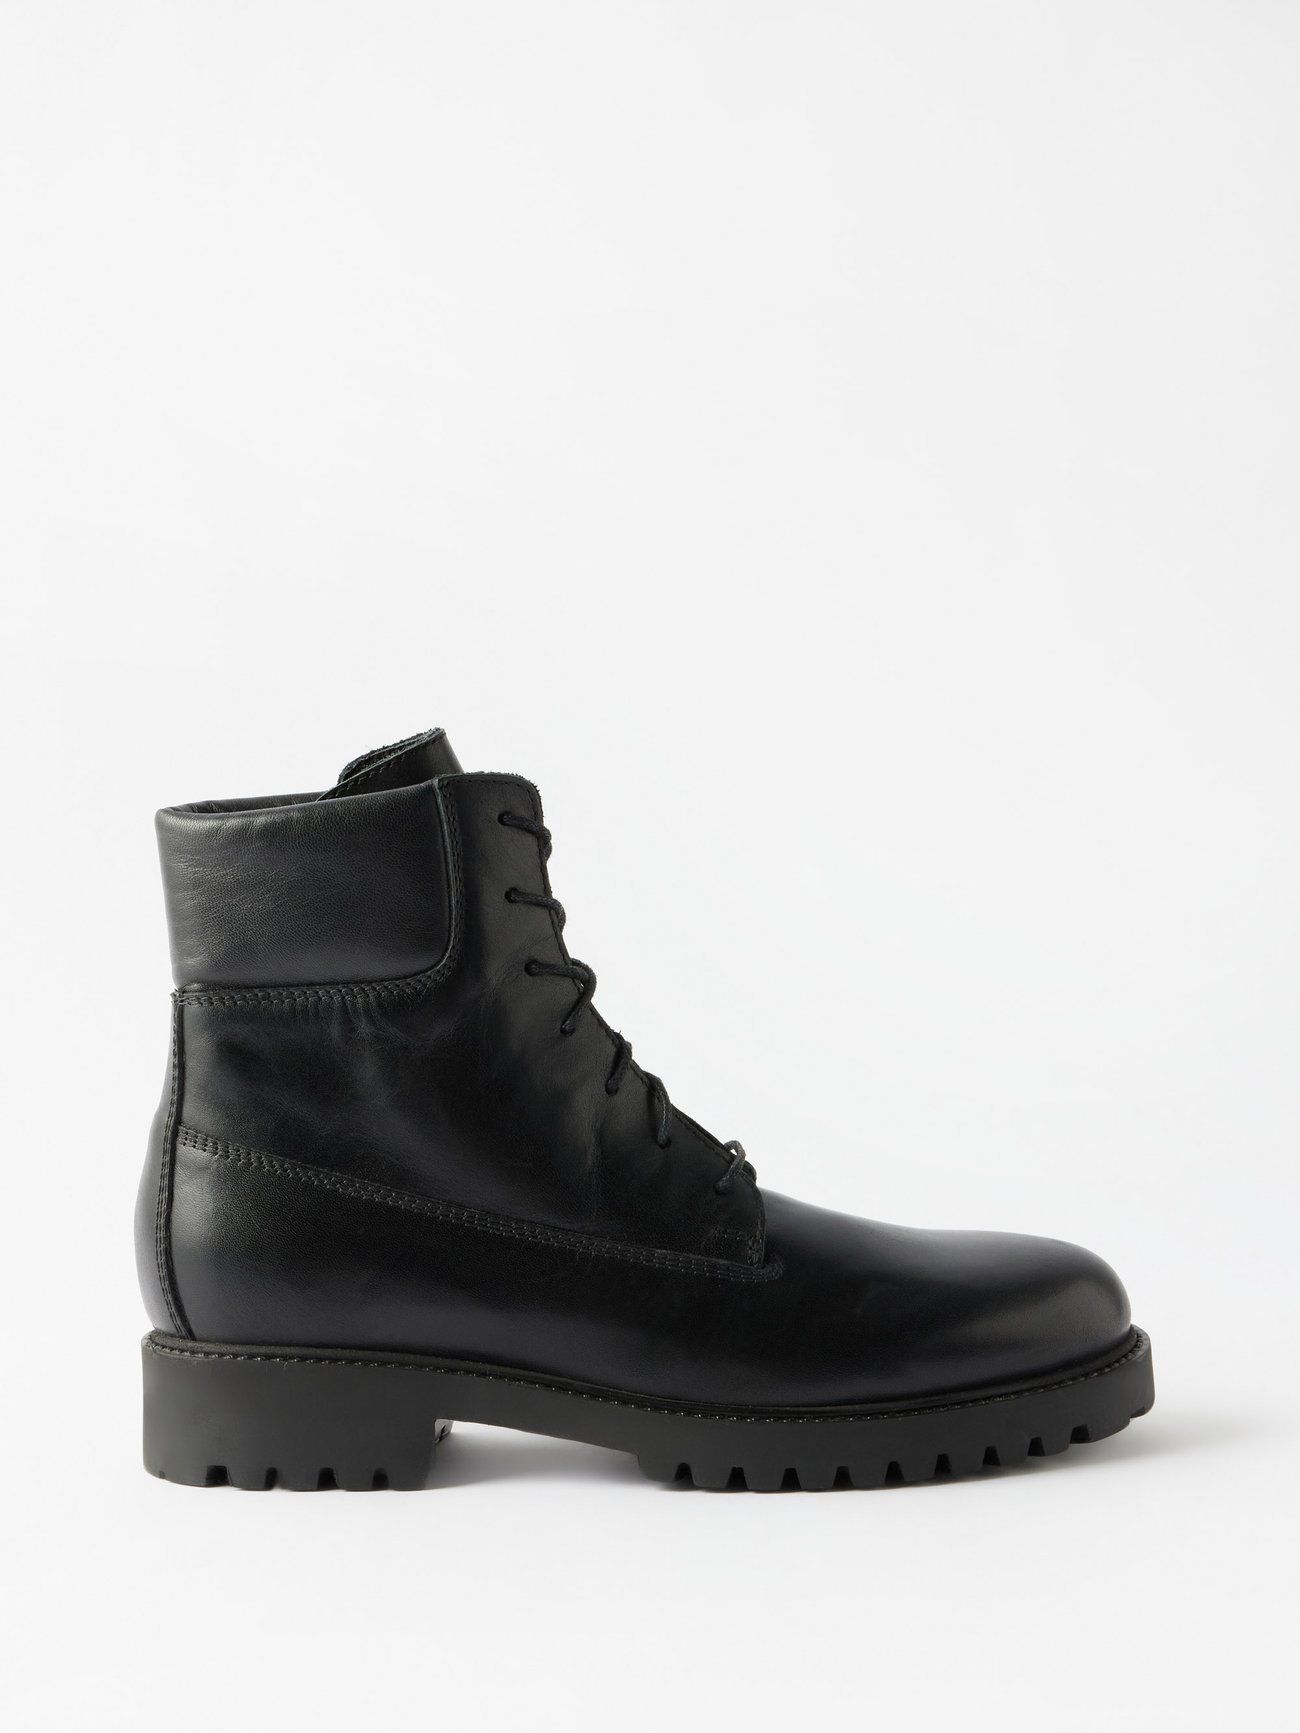 Everyone Should Own This Edgy Winter Boot